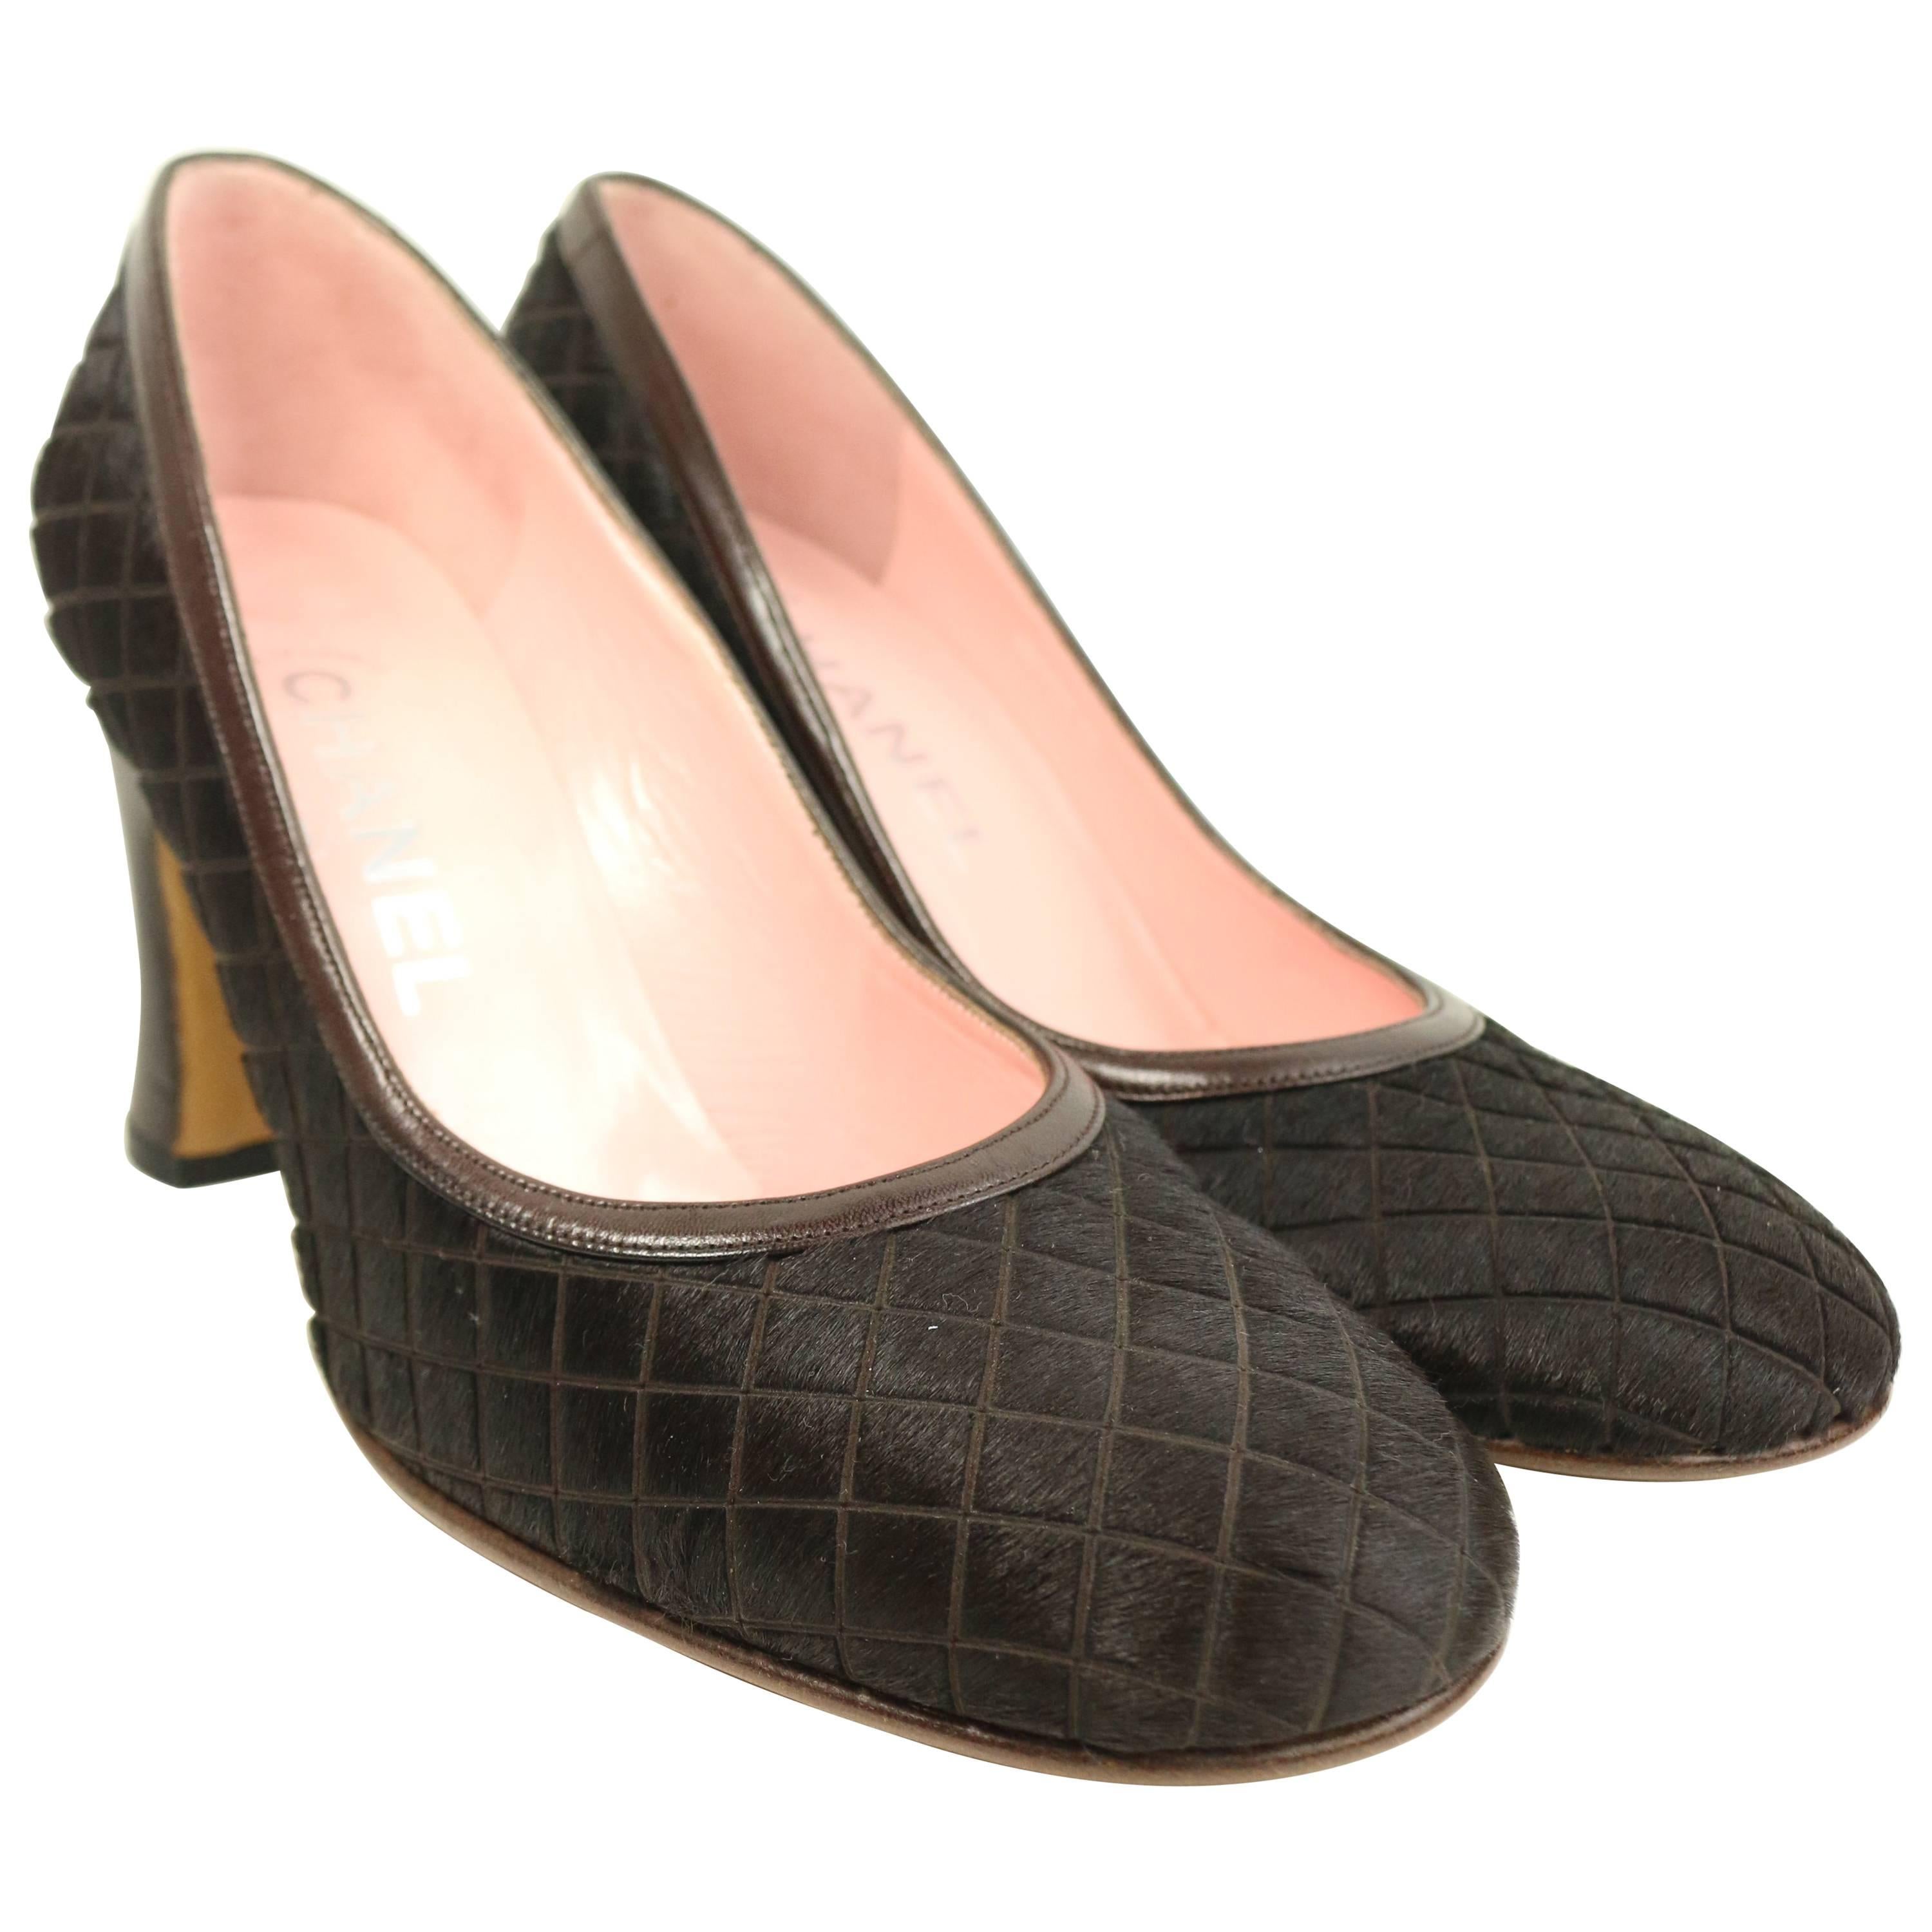 Women's Chanel Ponyhair Quilted Pumps Size EU 41